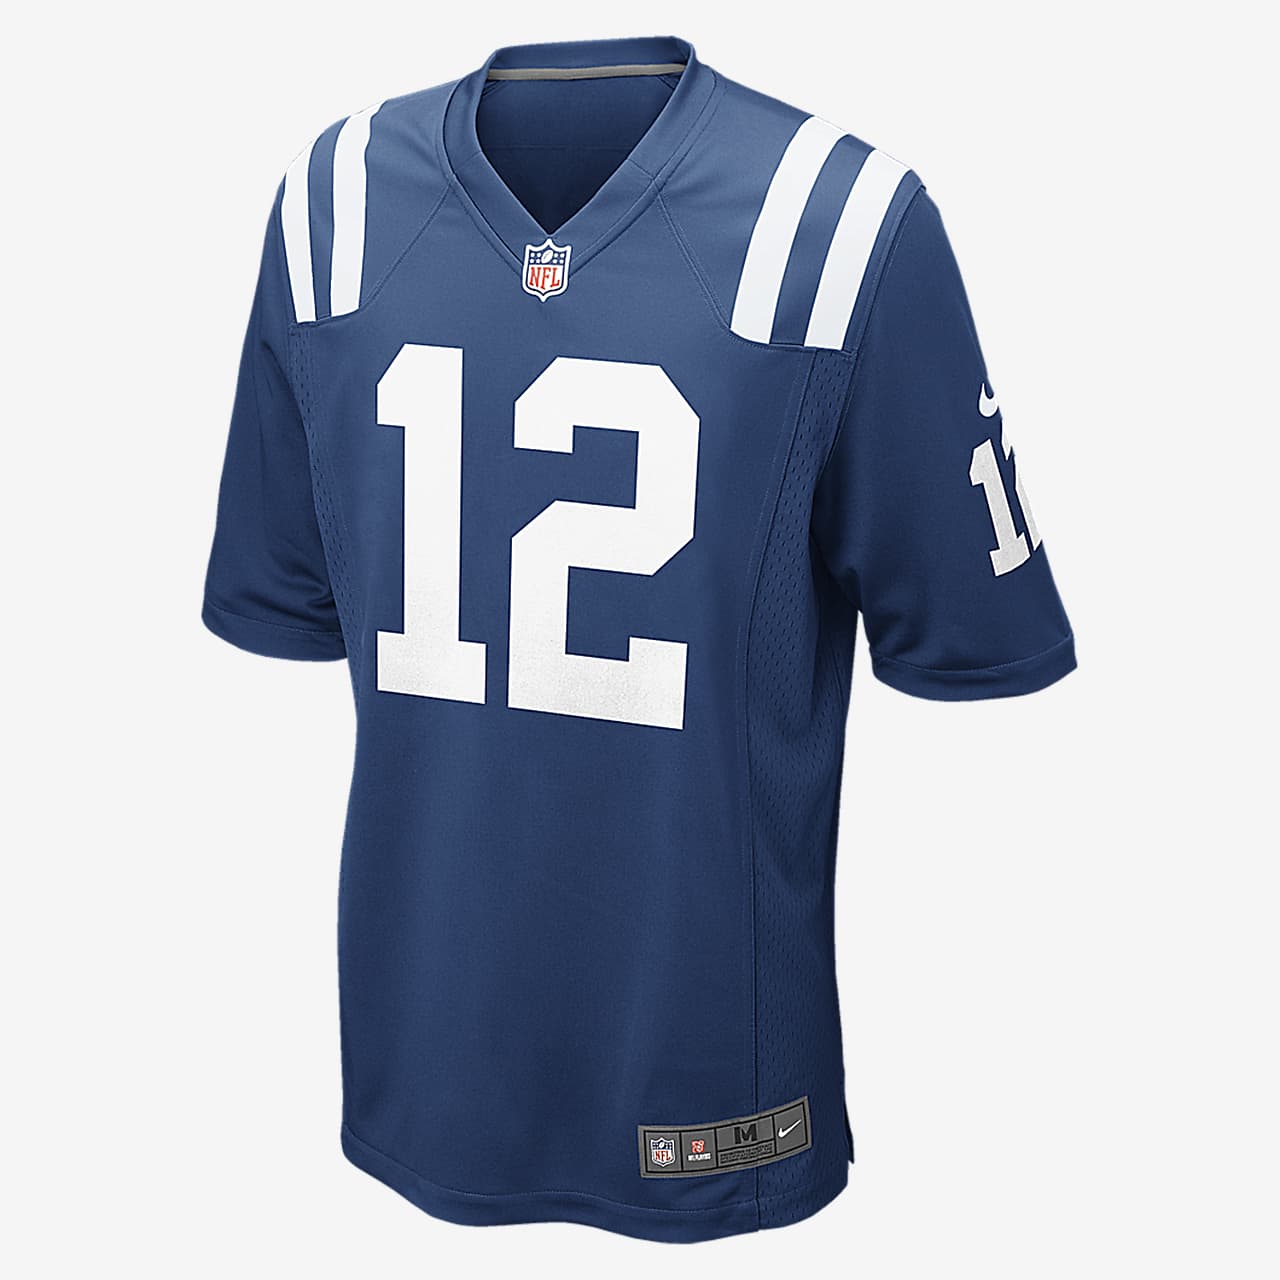 NFL Indianapolis Colts (Andrew Luck) Men's Football Home Game Jersey